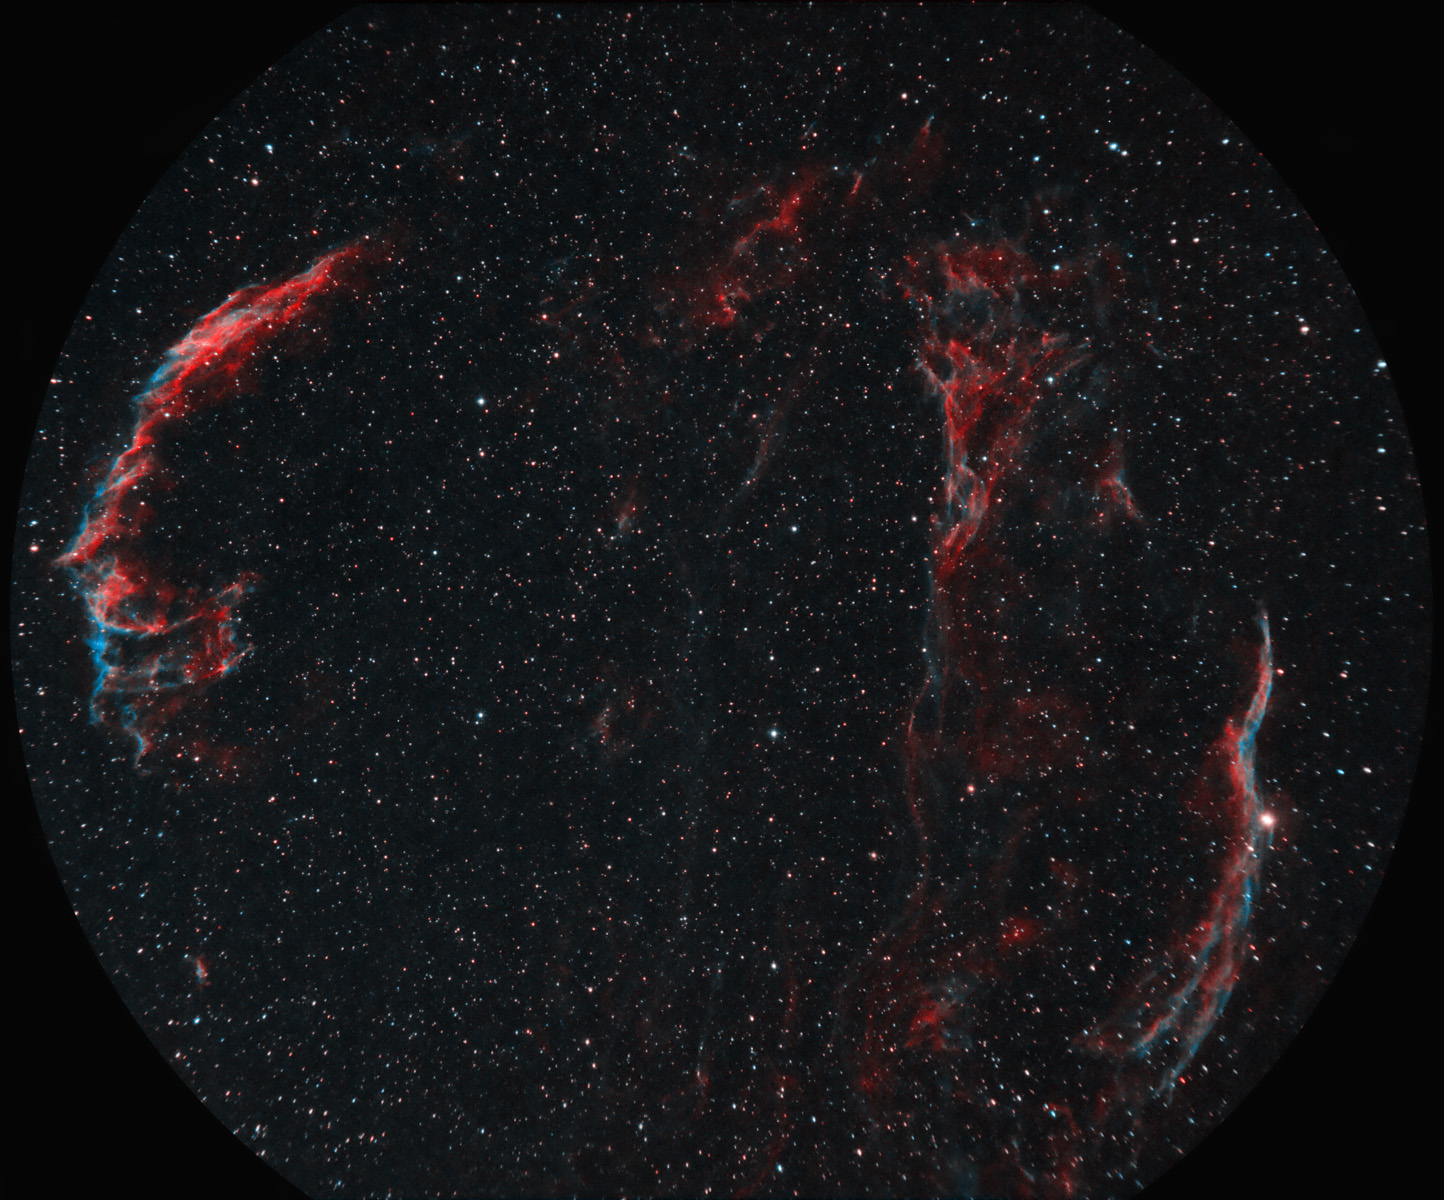 Veil Nebula Complex, in Ha and OIII, taken with a Borg 45ED.